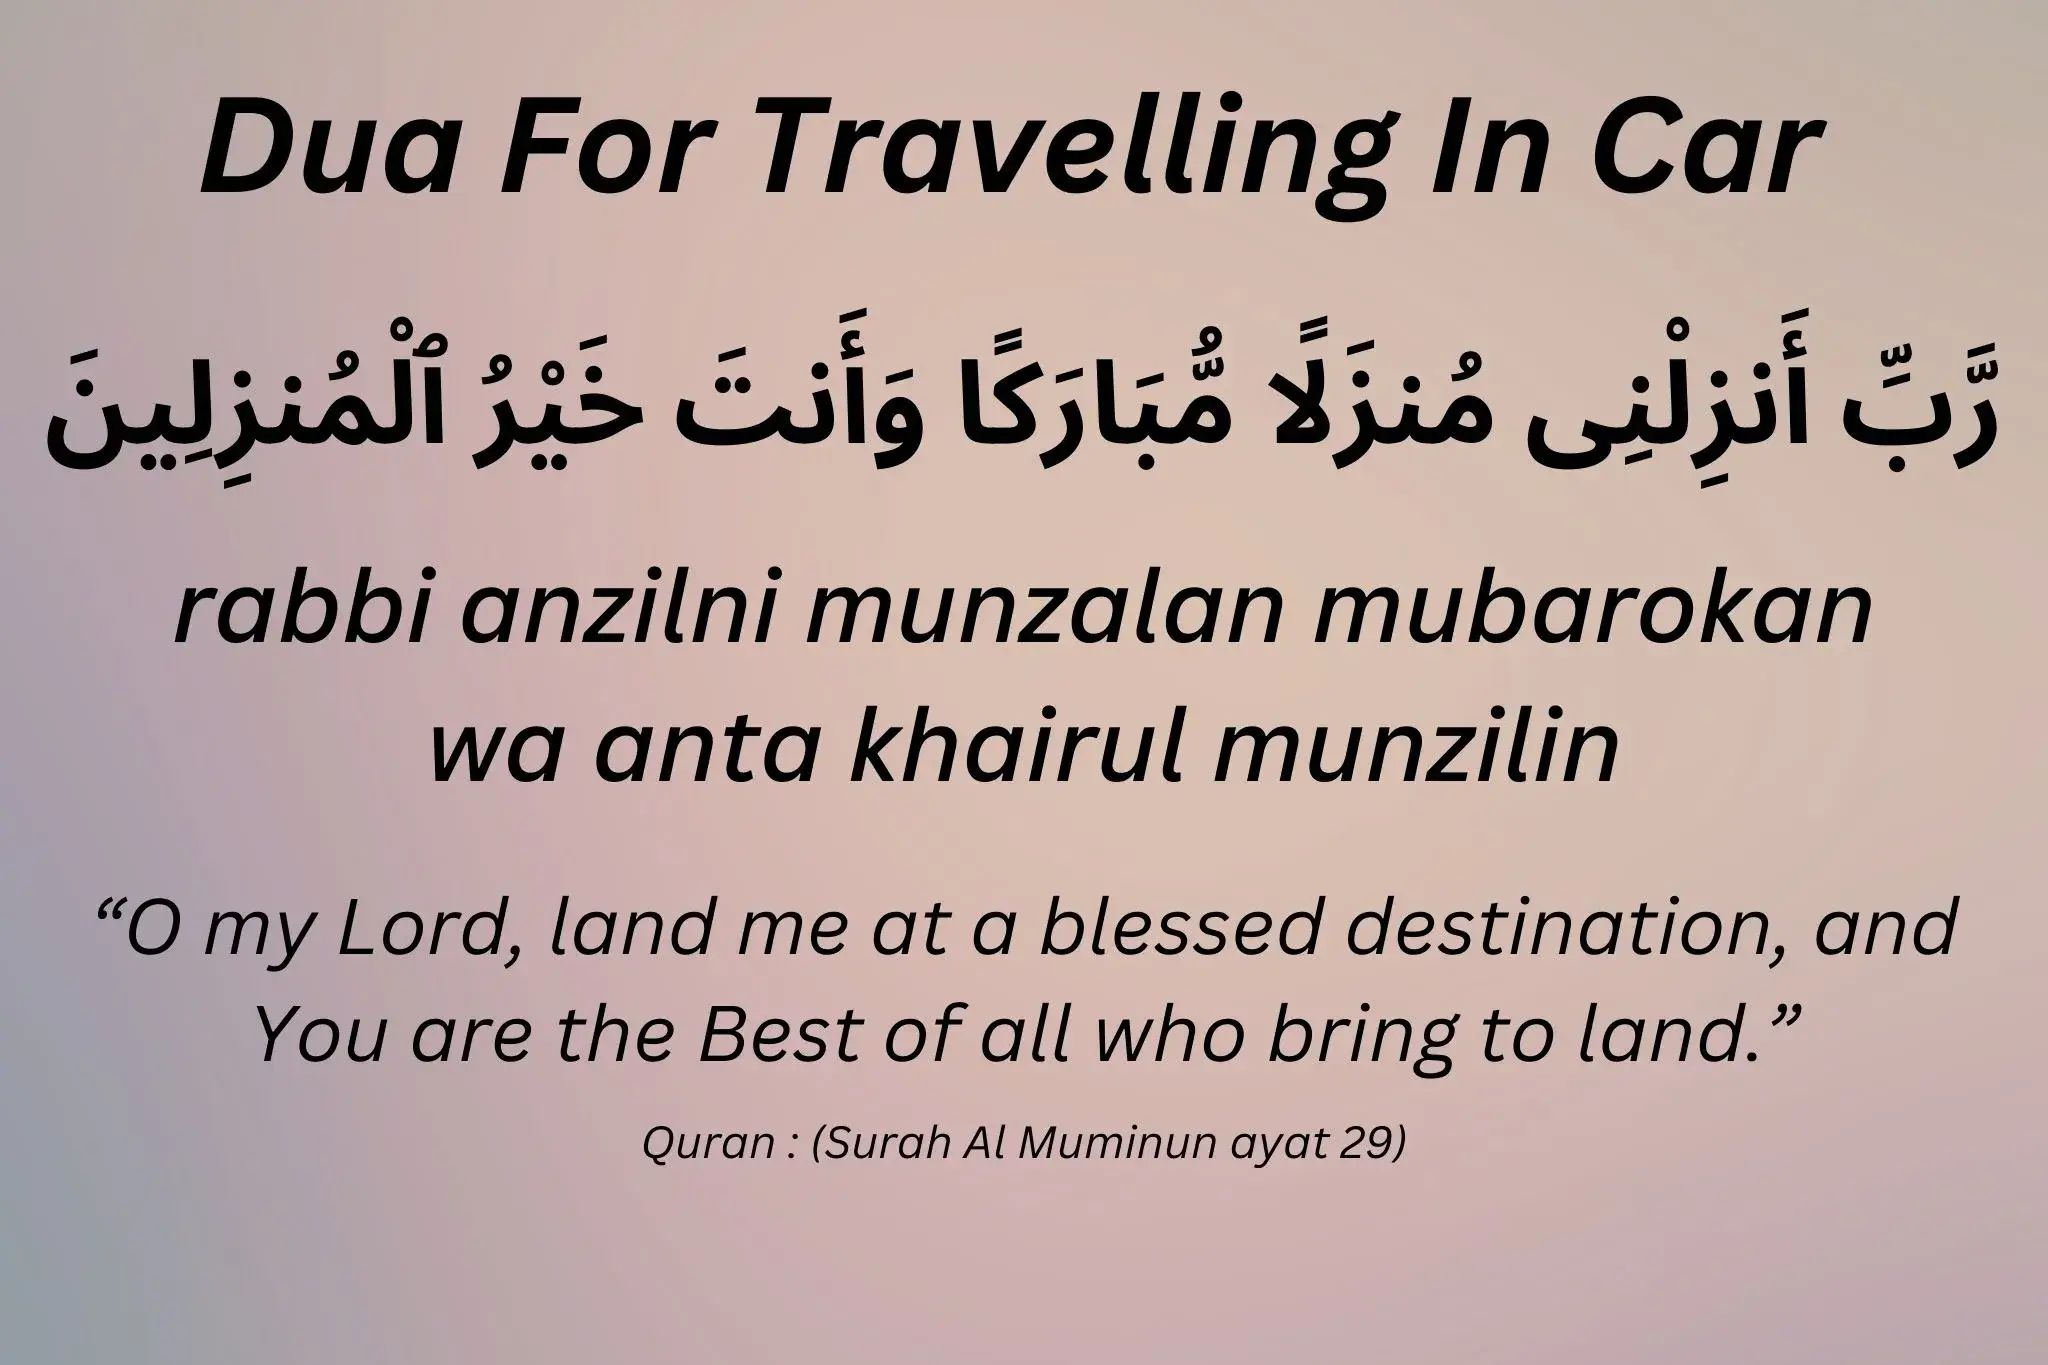 dua for traveling in car